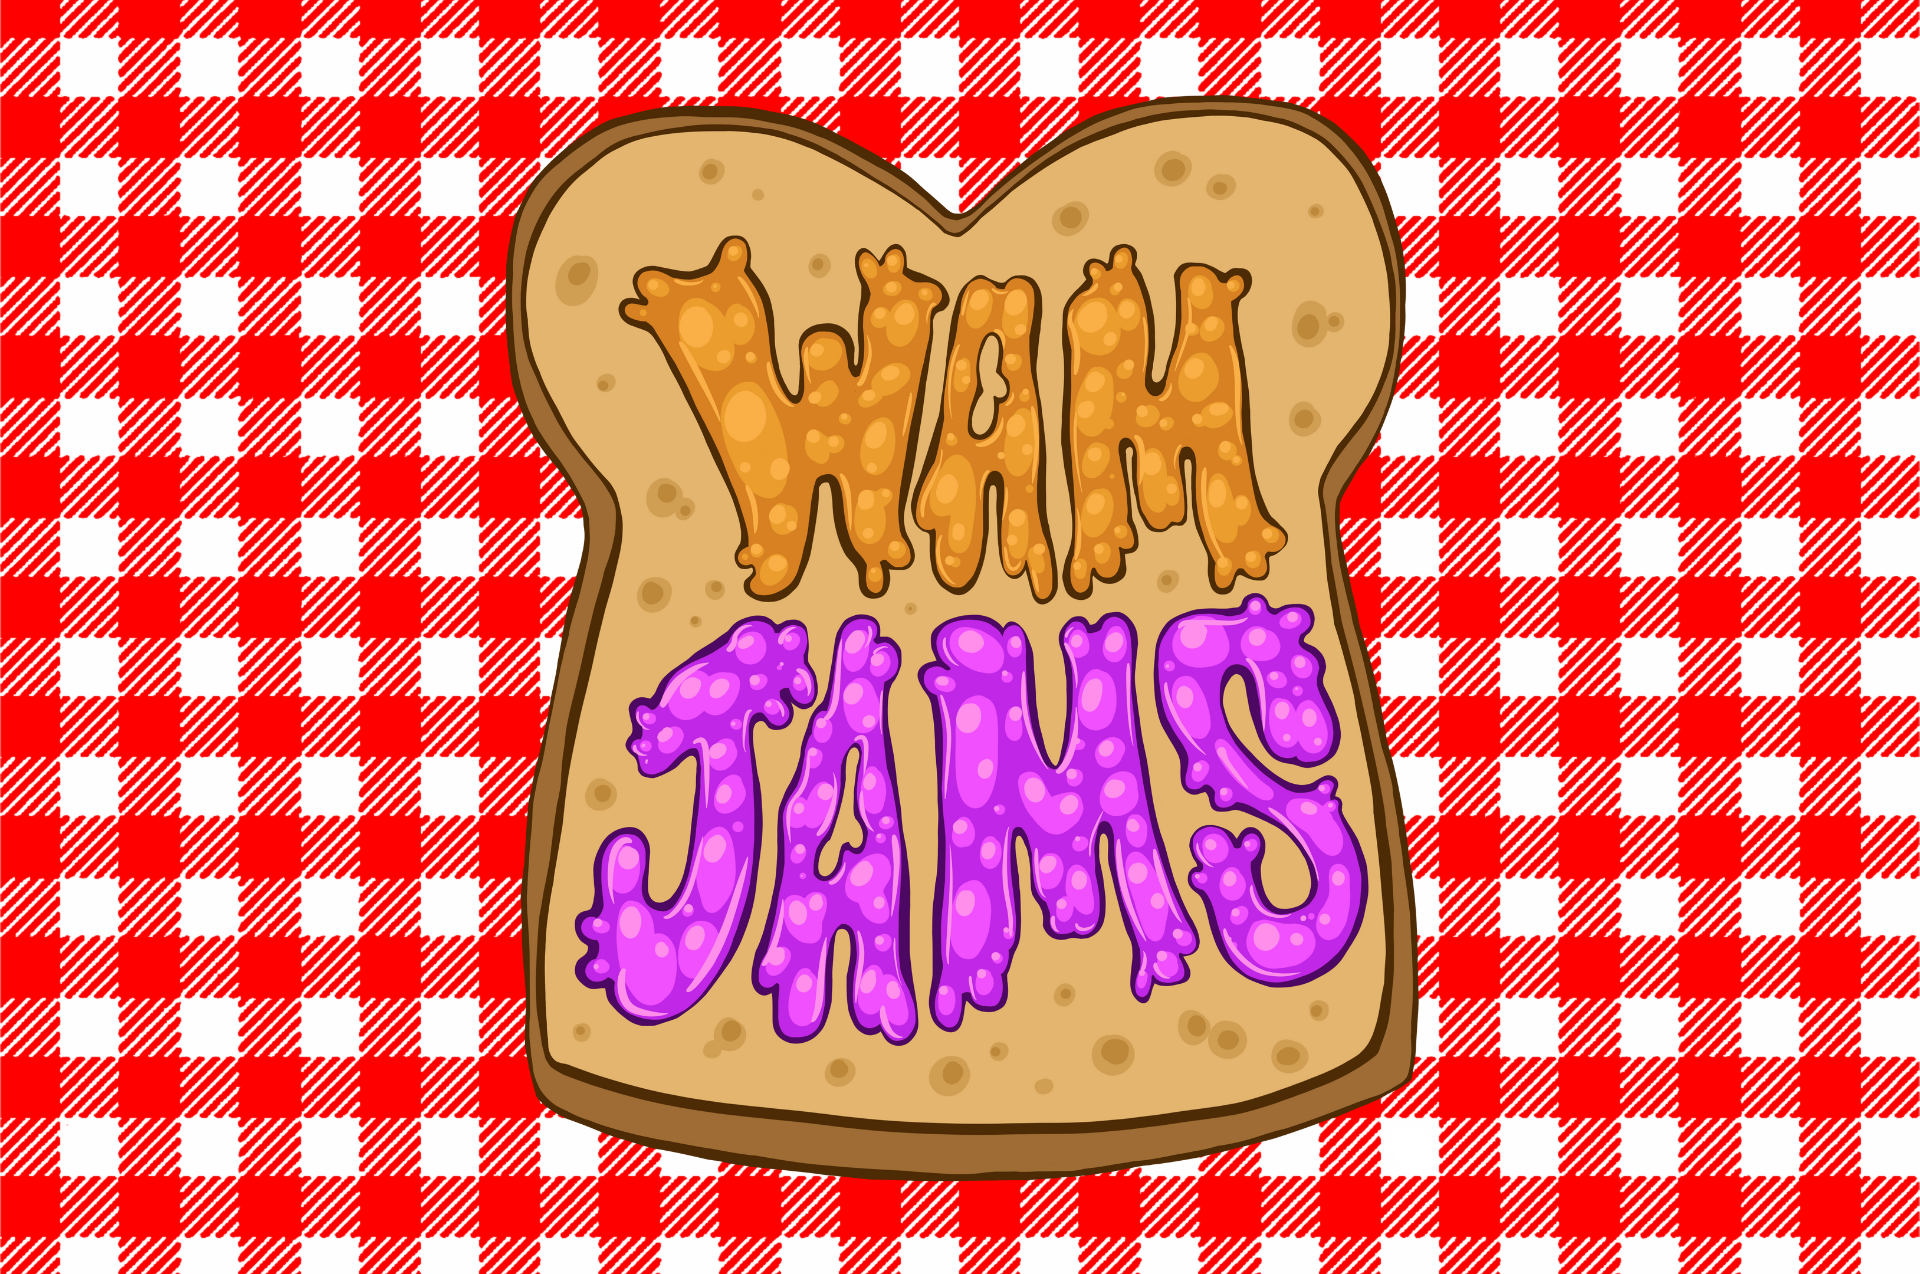 Red and white gingham background, with an illustrated graphic of a slice of bread and the words "WAM JAMS" written in peanut butter and jelly